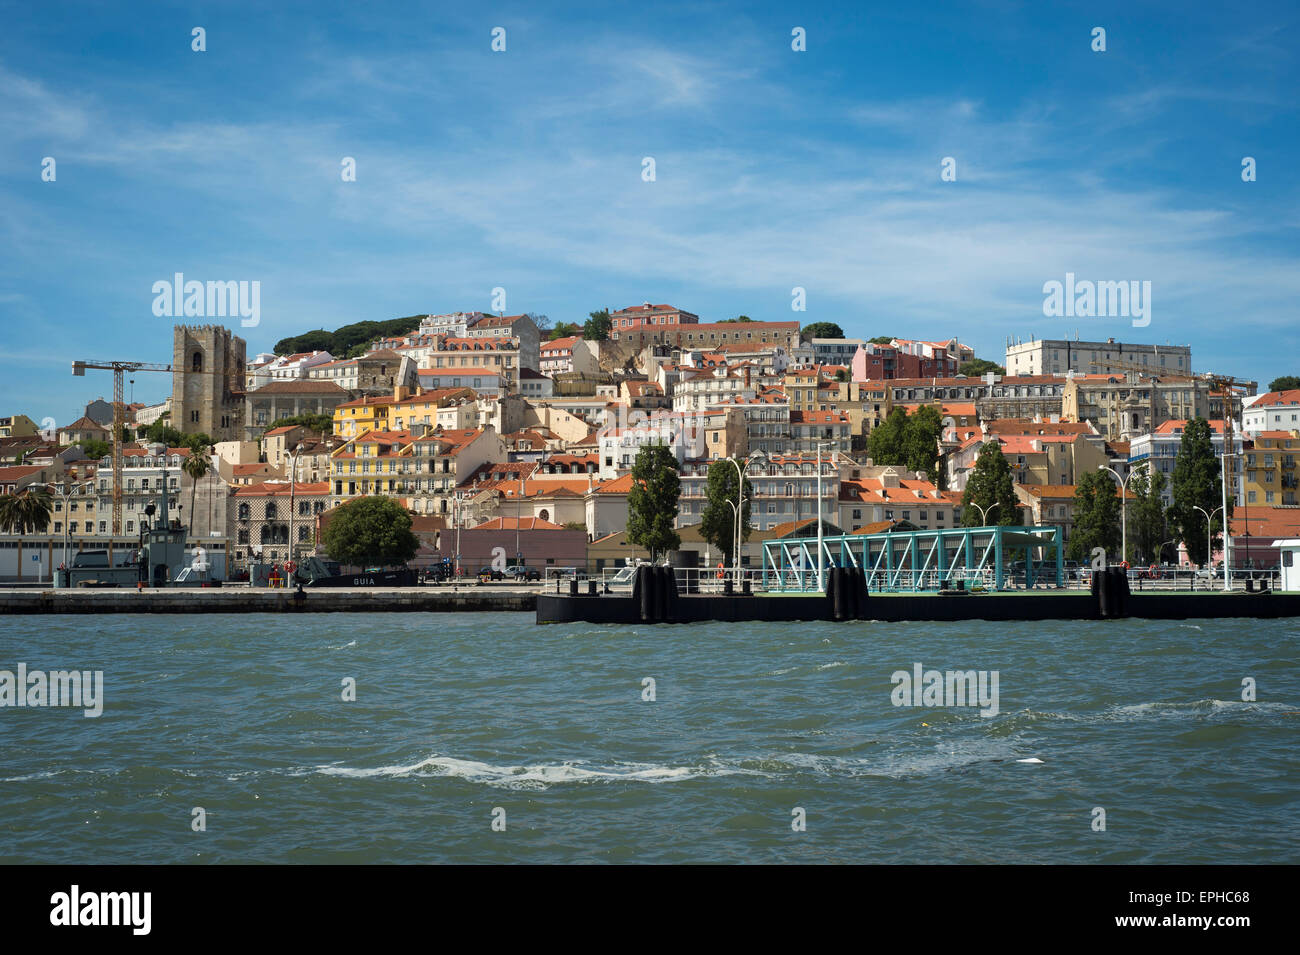 The city of Lisbon viewed from the River Tagus Stock Photo